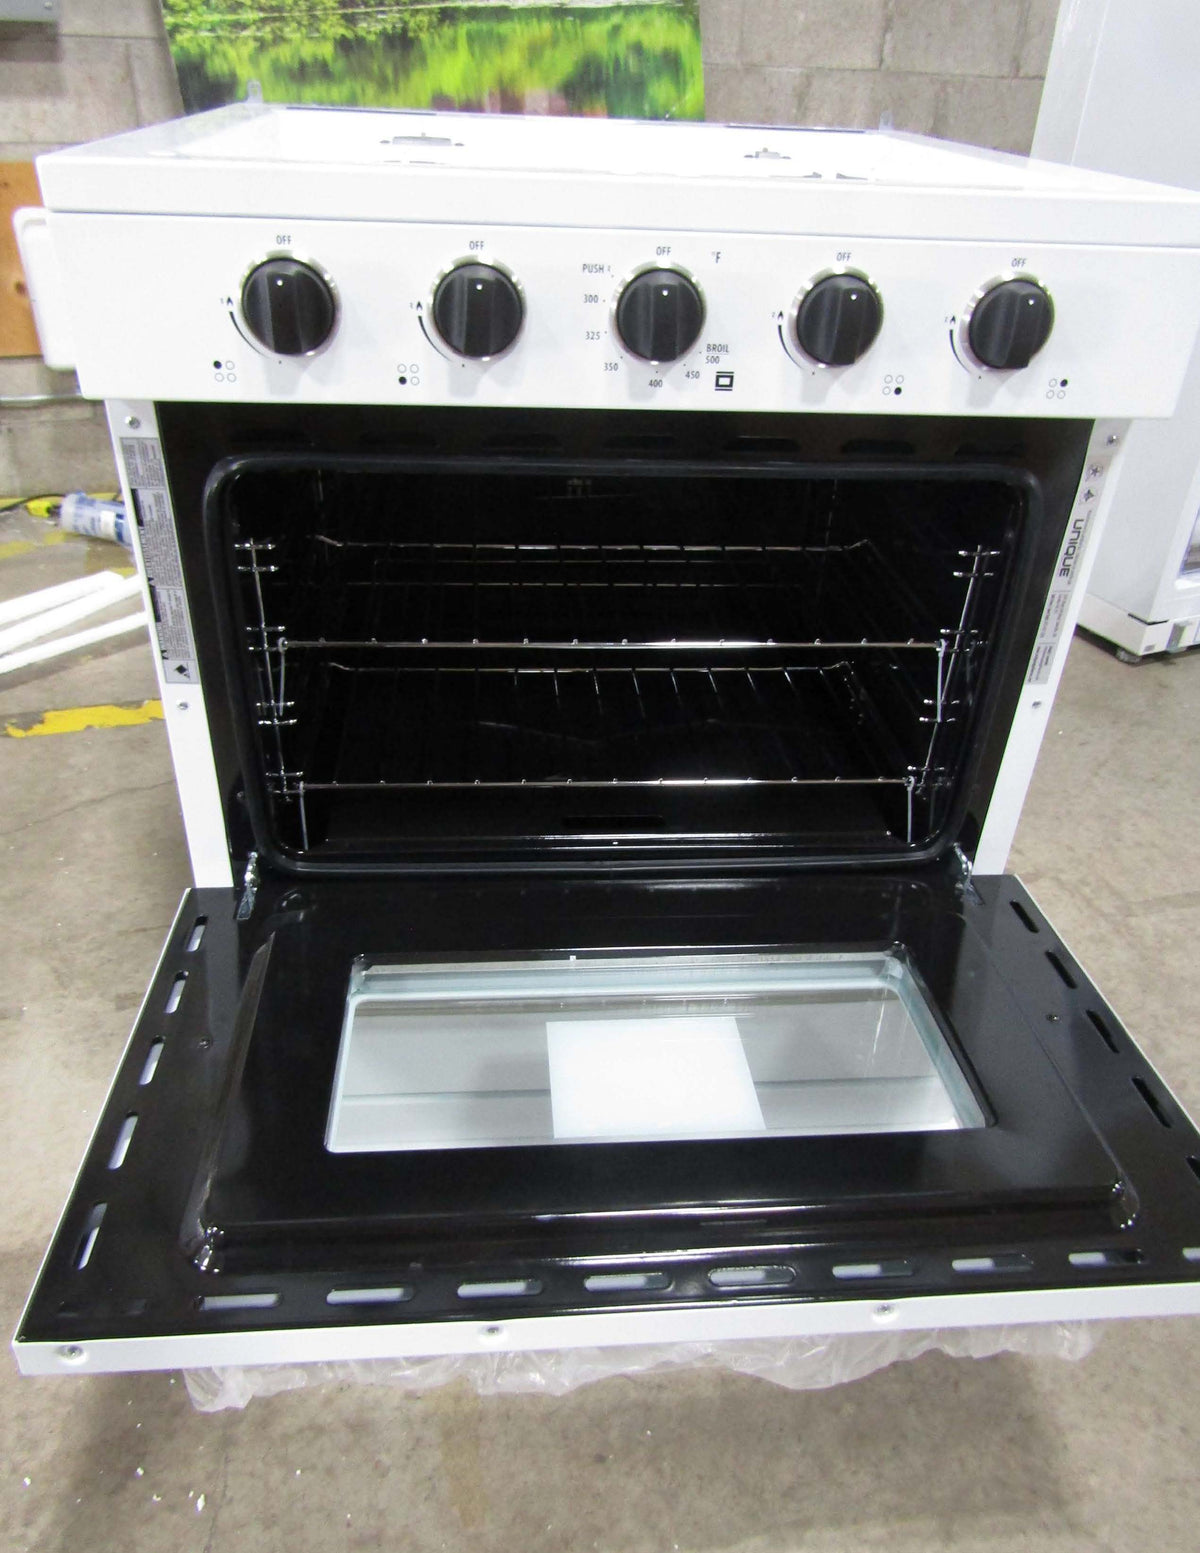 Unique Scratch and Dent or Pre-Owned Off-Grid Appliances New Scratch &amp; Dent Unique Classic 30&quot; Propane Range Battery Ignition Variable BTU Sealed Burners Cast Iron Grates With Window UGP-30G OF1 W (White) Serial #1017592 30% Off!